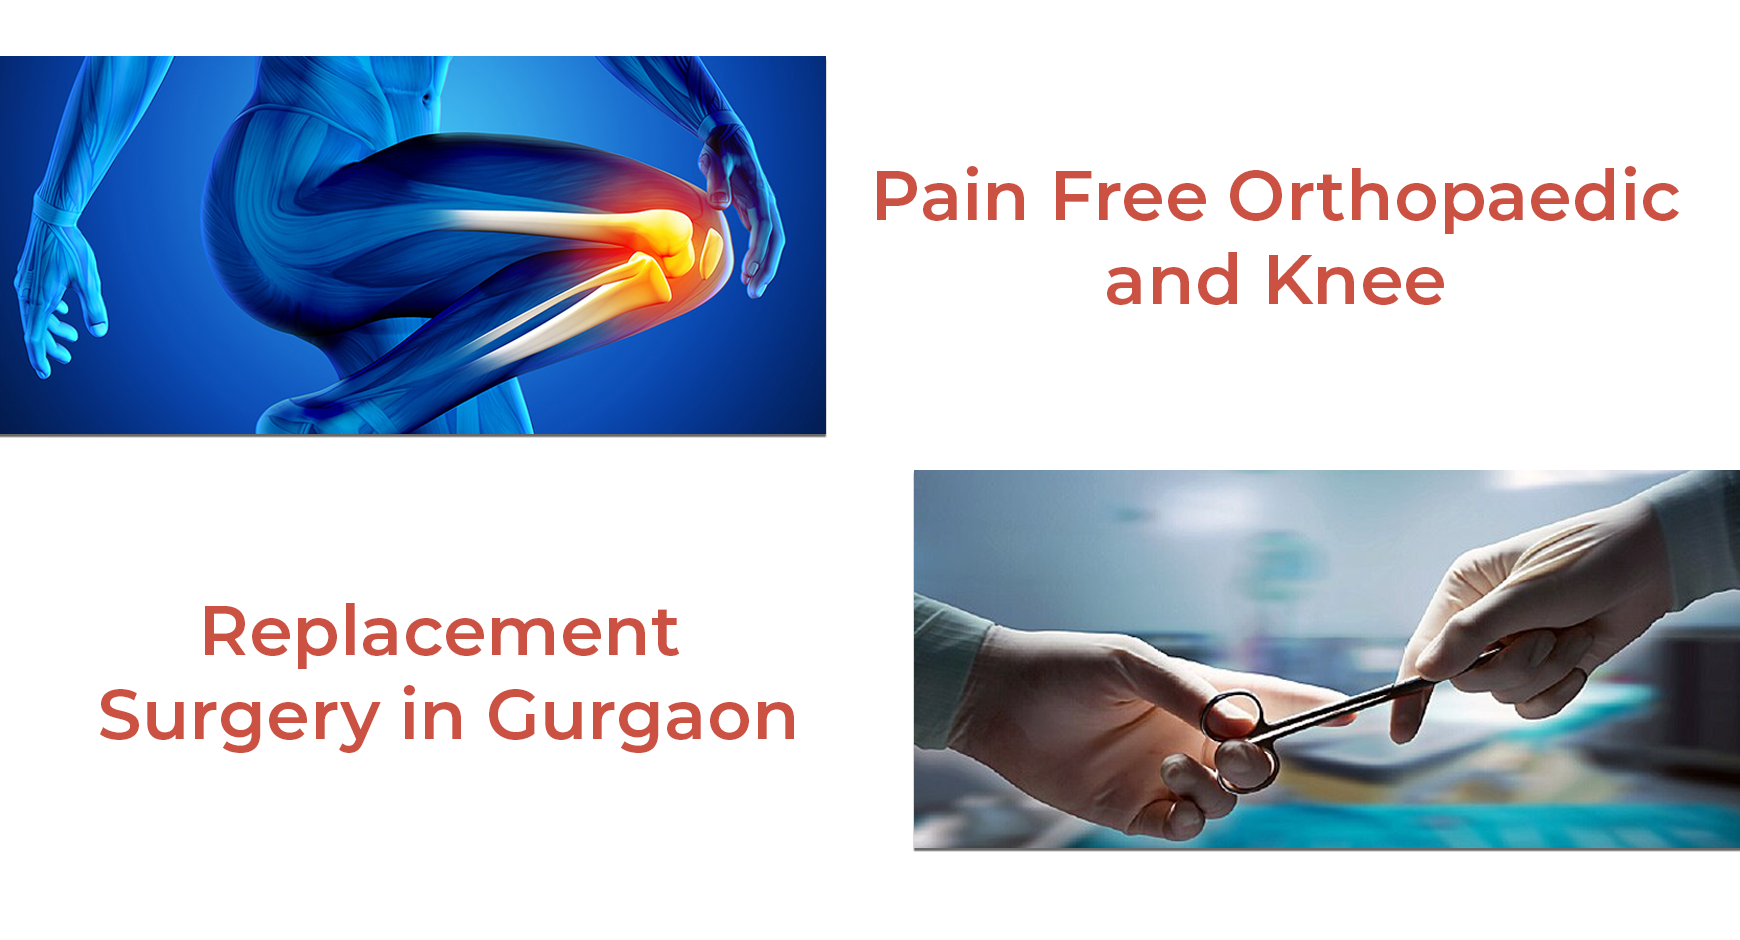 Pain Free Orthopaedic and Knee Replacement Surgery in Gurgaon